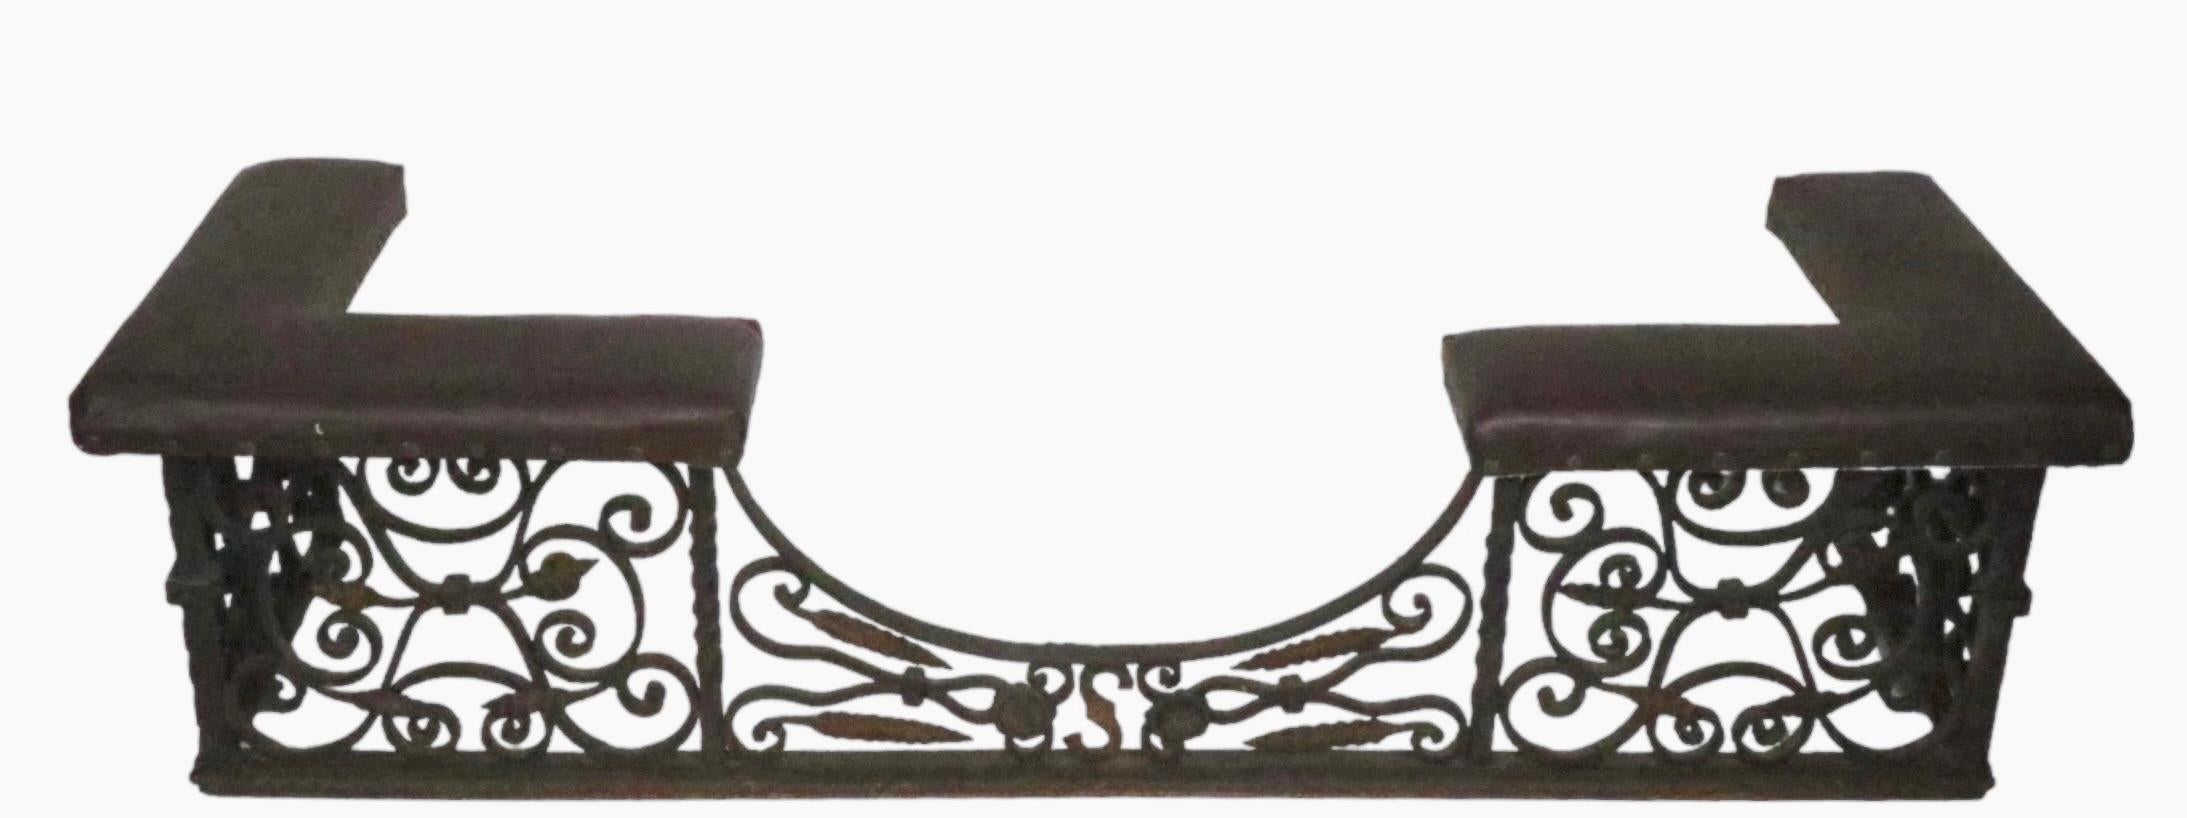 Antique Arts and Crafts Gothic Spanish Style Wrought Iron Bench Club Fender For Sale 5